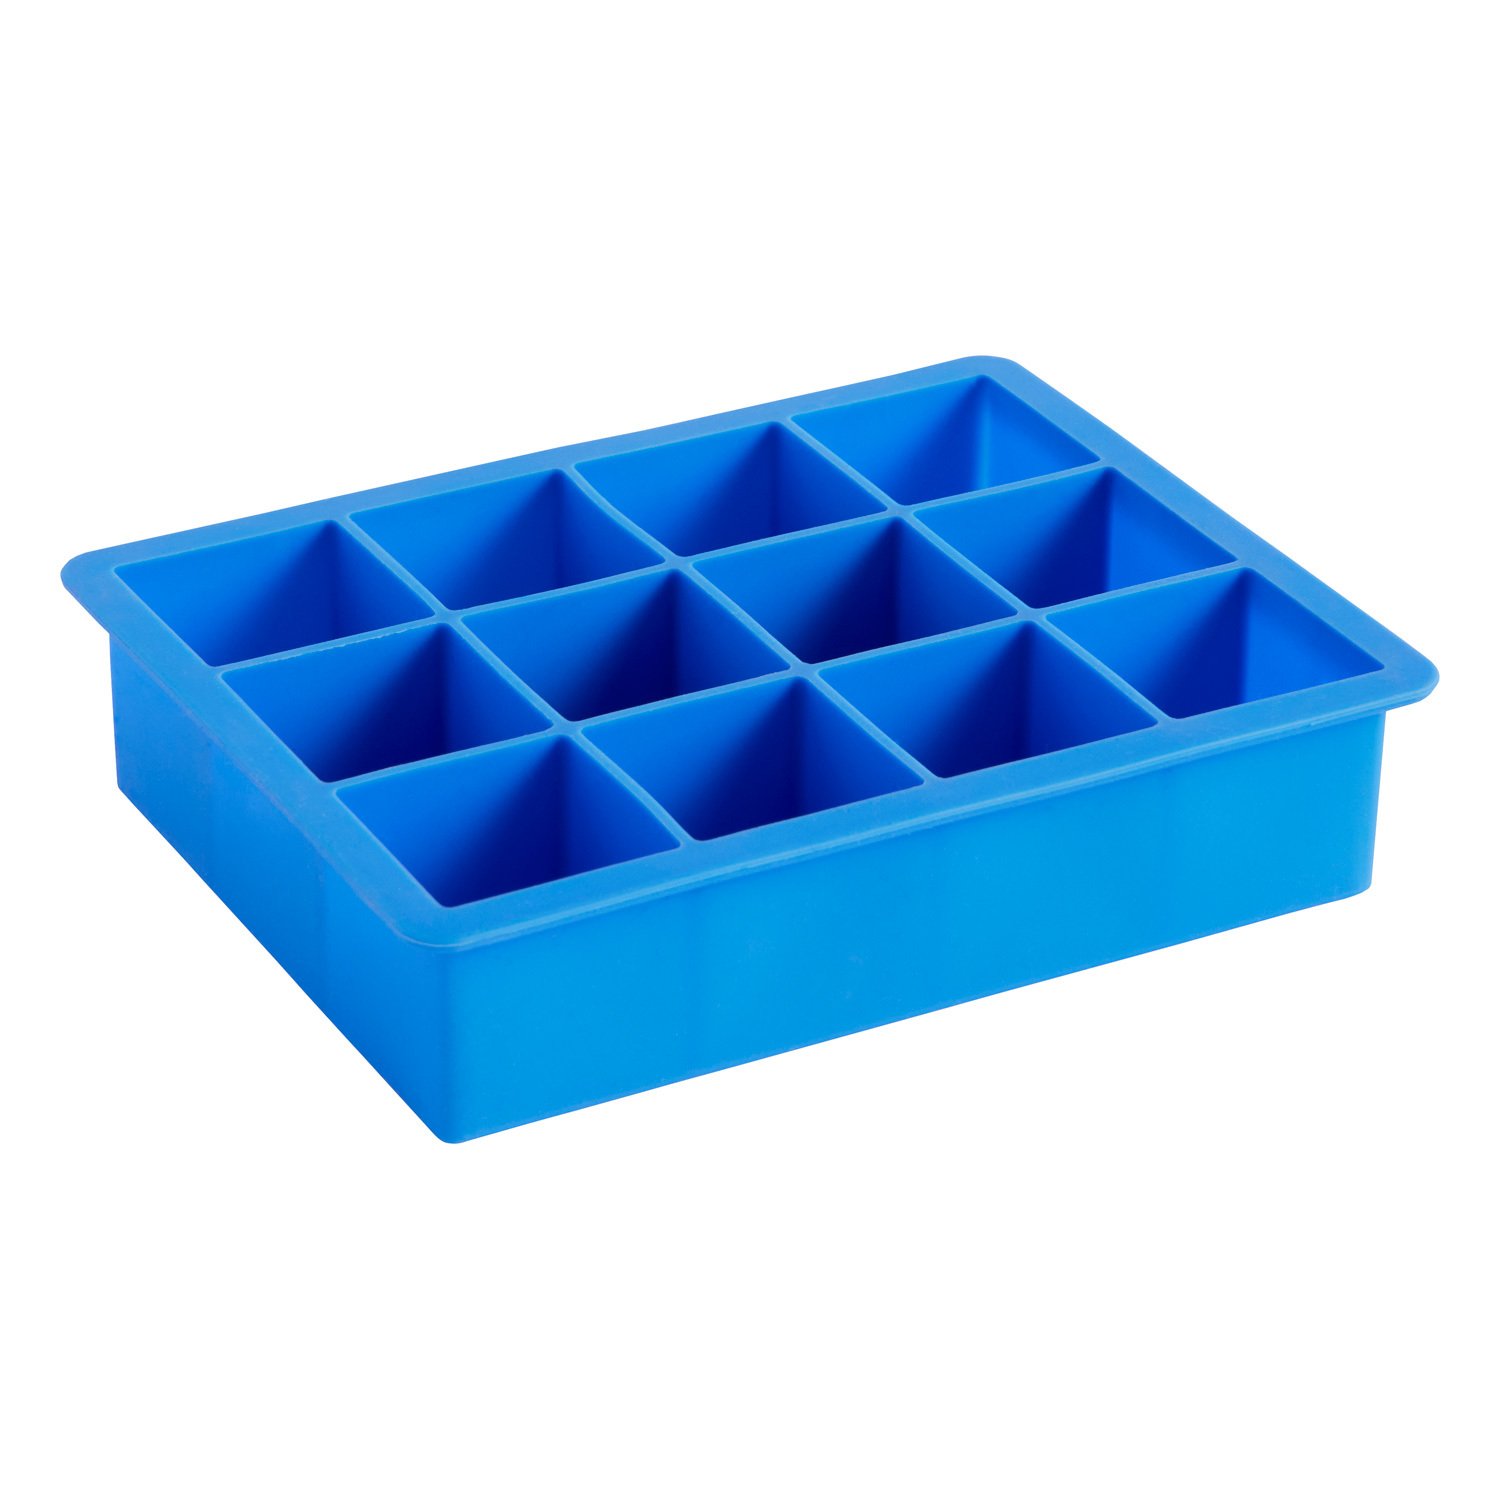 Giant Ice Cube Round Tray, 2 Packs Of Xxl Silicone Ice Cube Molds